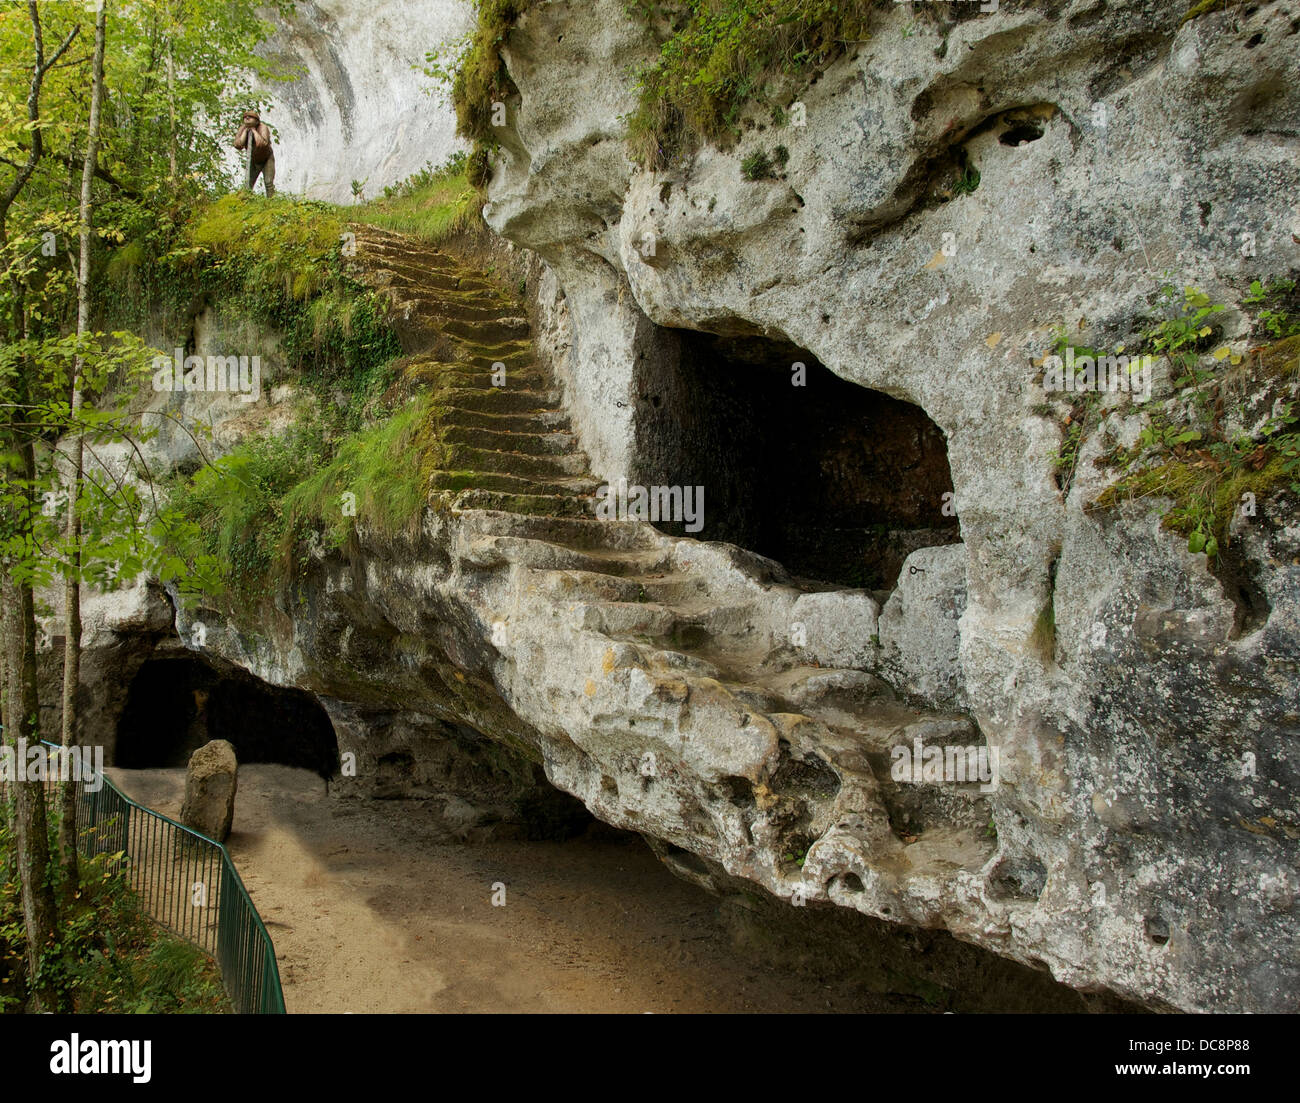 The medieval staircase carved into the cliff, troglodyte village of La Roque Saint-Christophe, Dordogne, France. Stock Photo